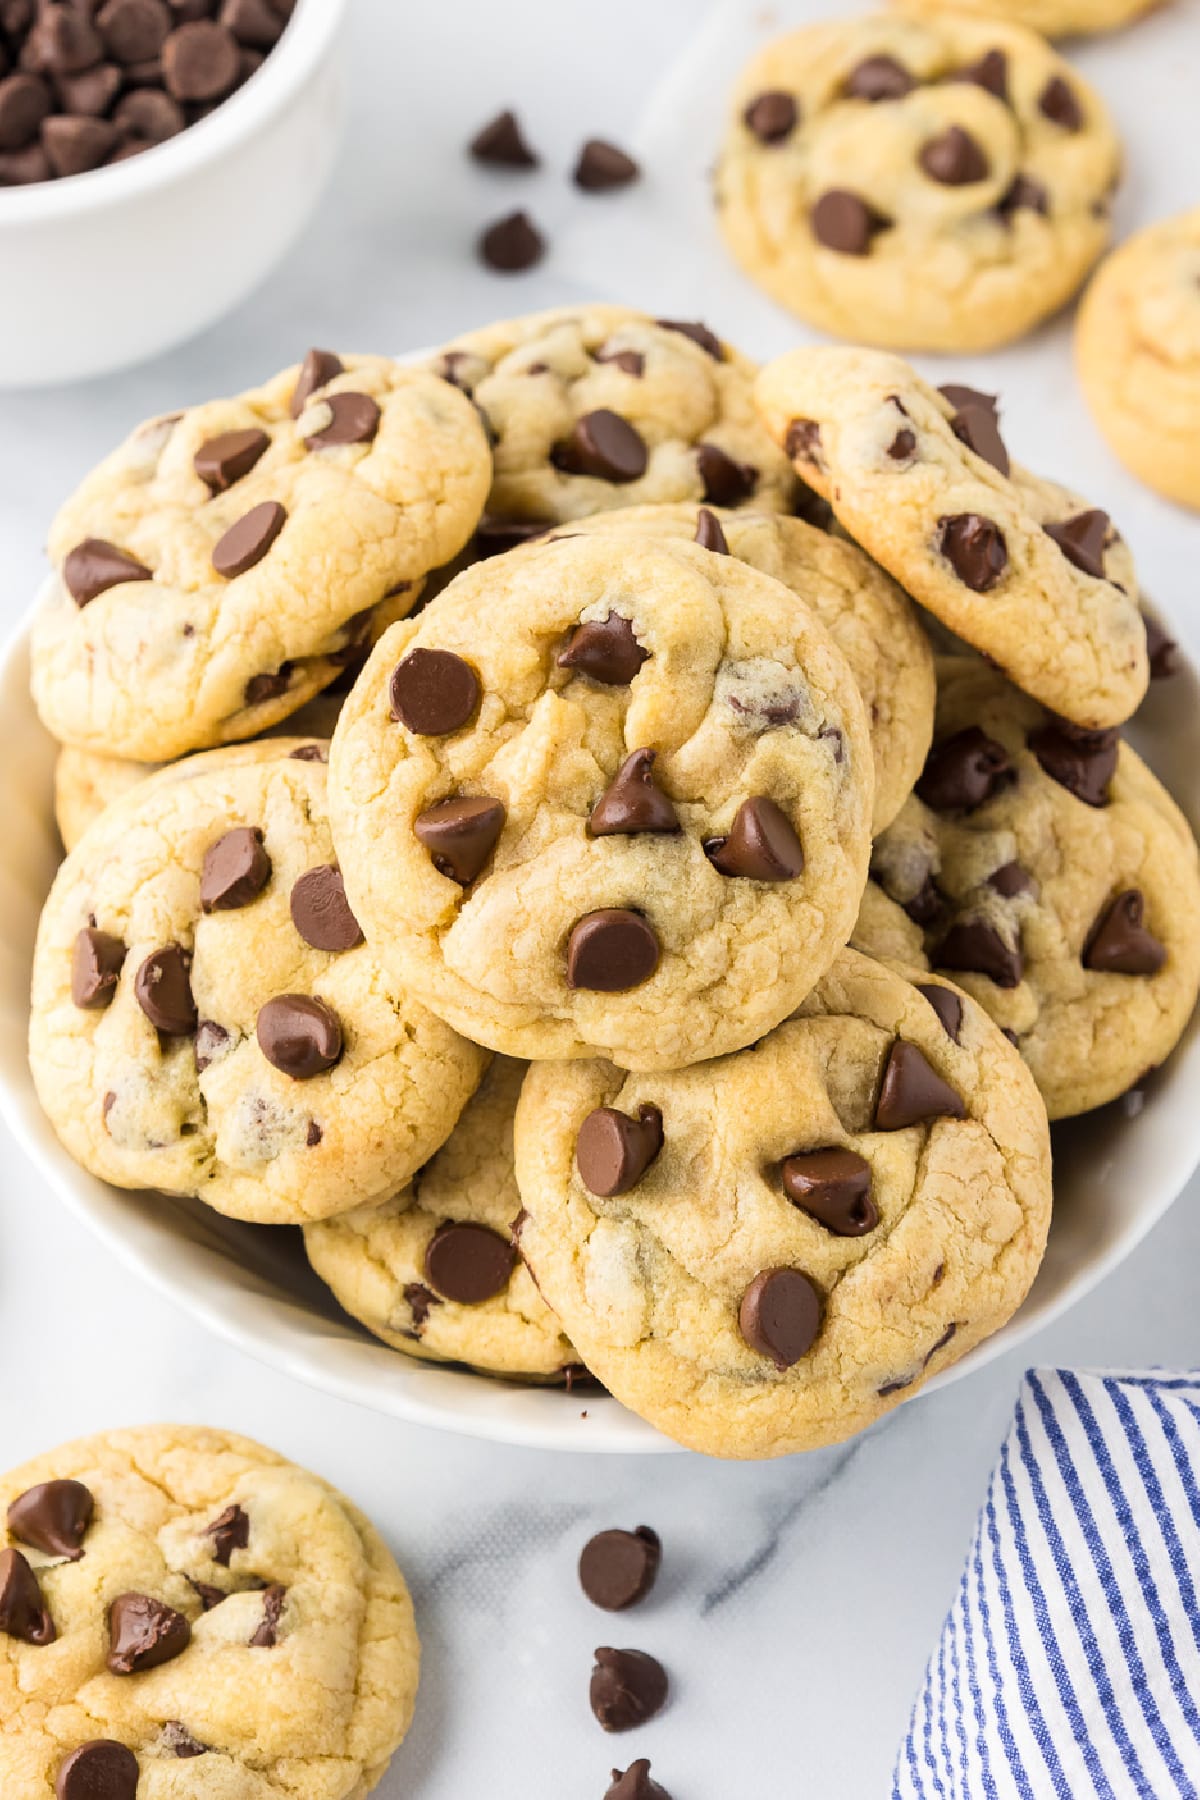 The BEST Chocolate Chip Vanilla Pudding Cookies